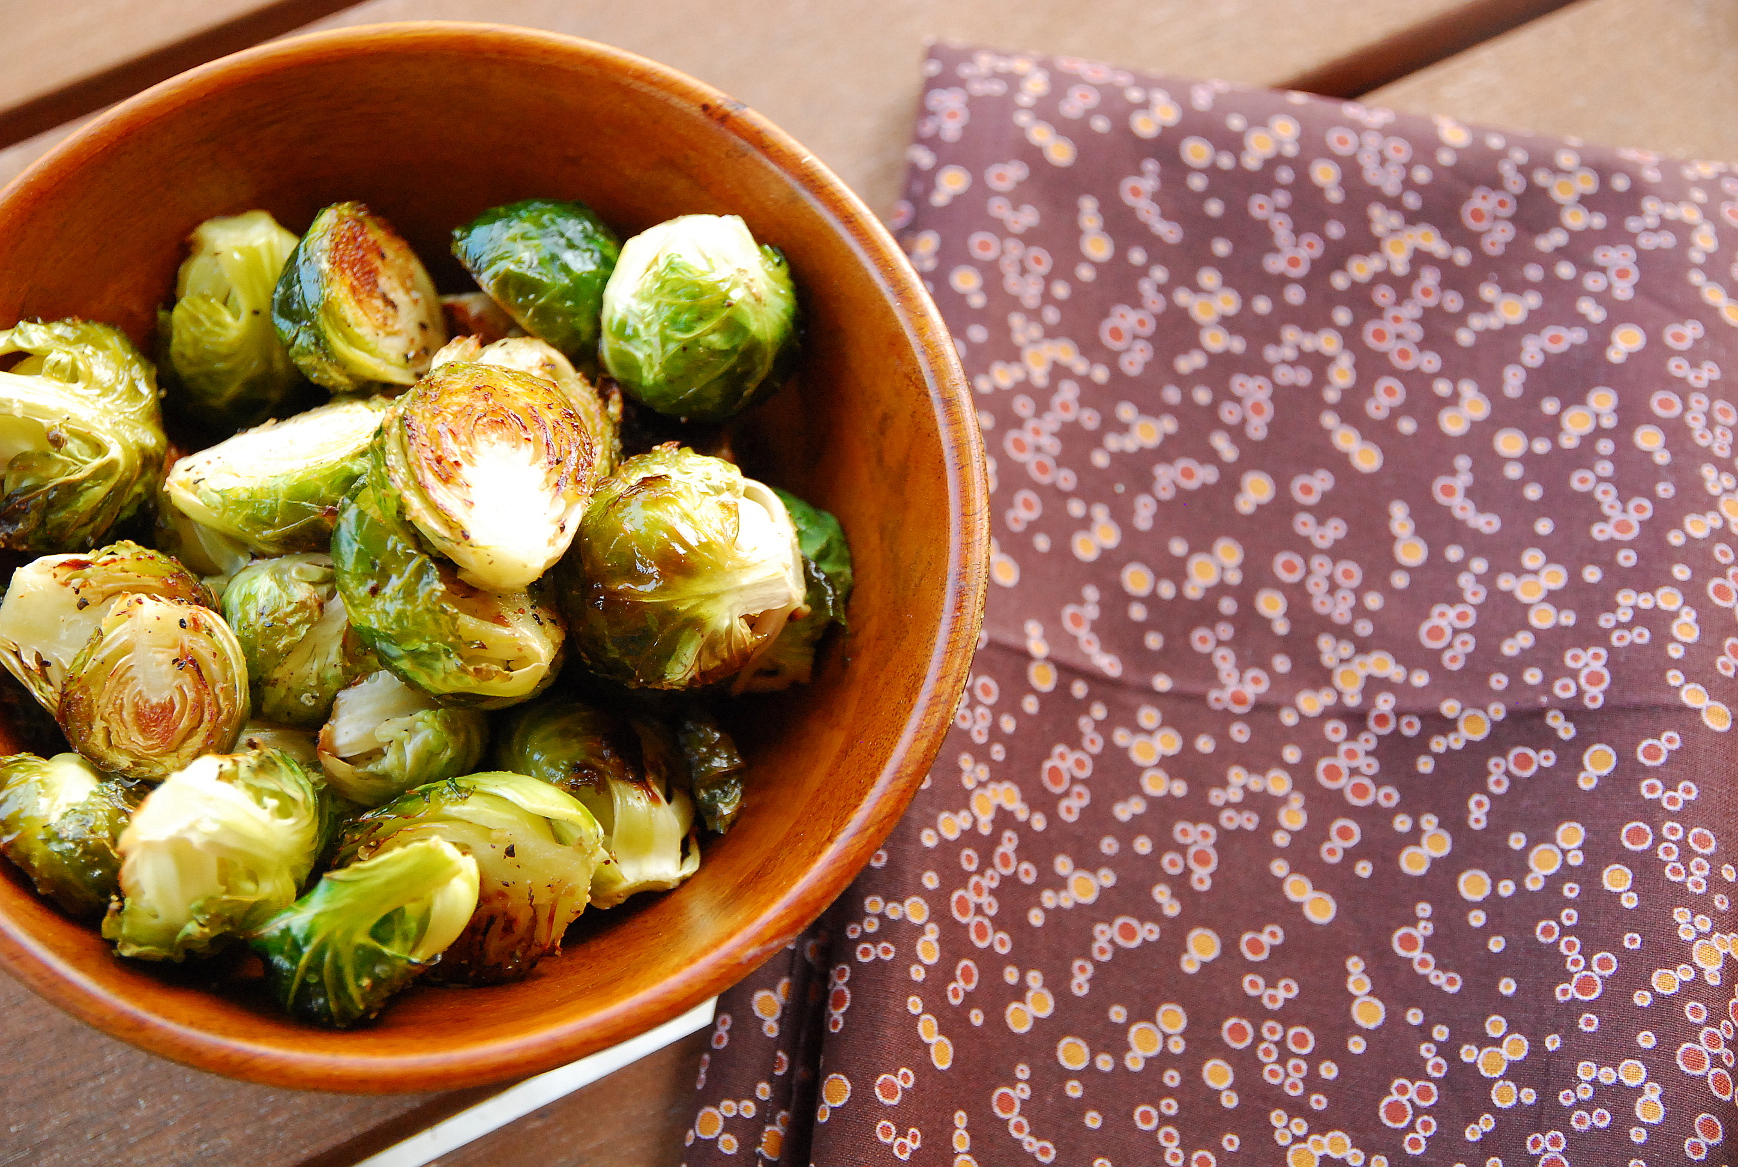 How I Got My Kids To Eat Brussels Sprouts